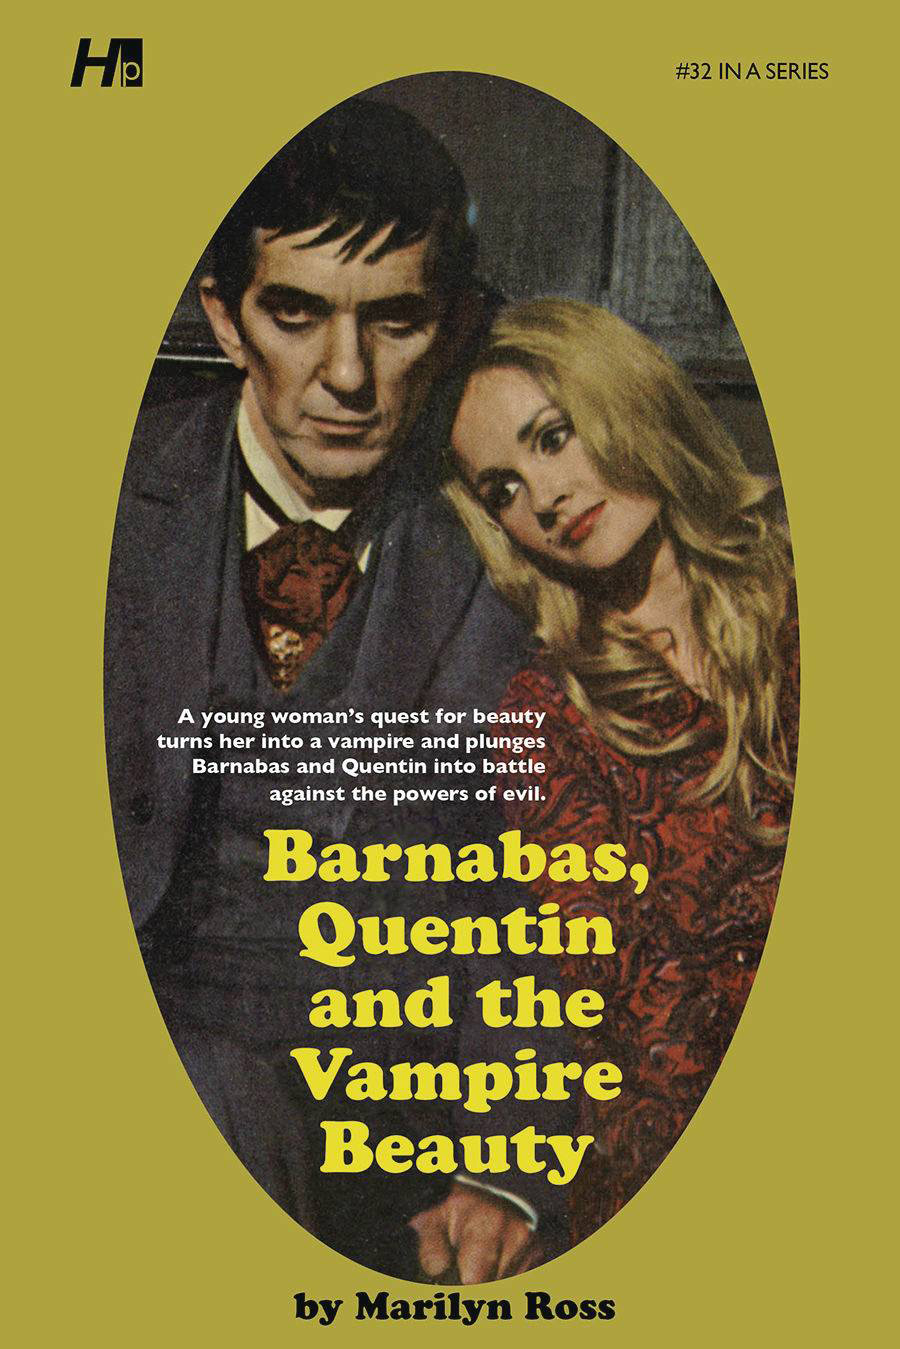 Dark Shadows Paperback Library Novel Vol 32 Barnabas Quentin And The Vampire Beauty TP